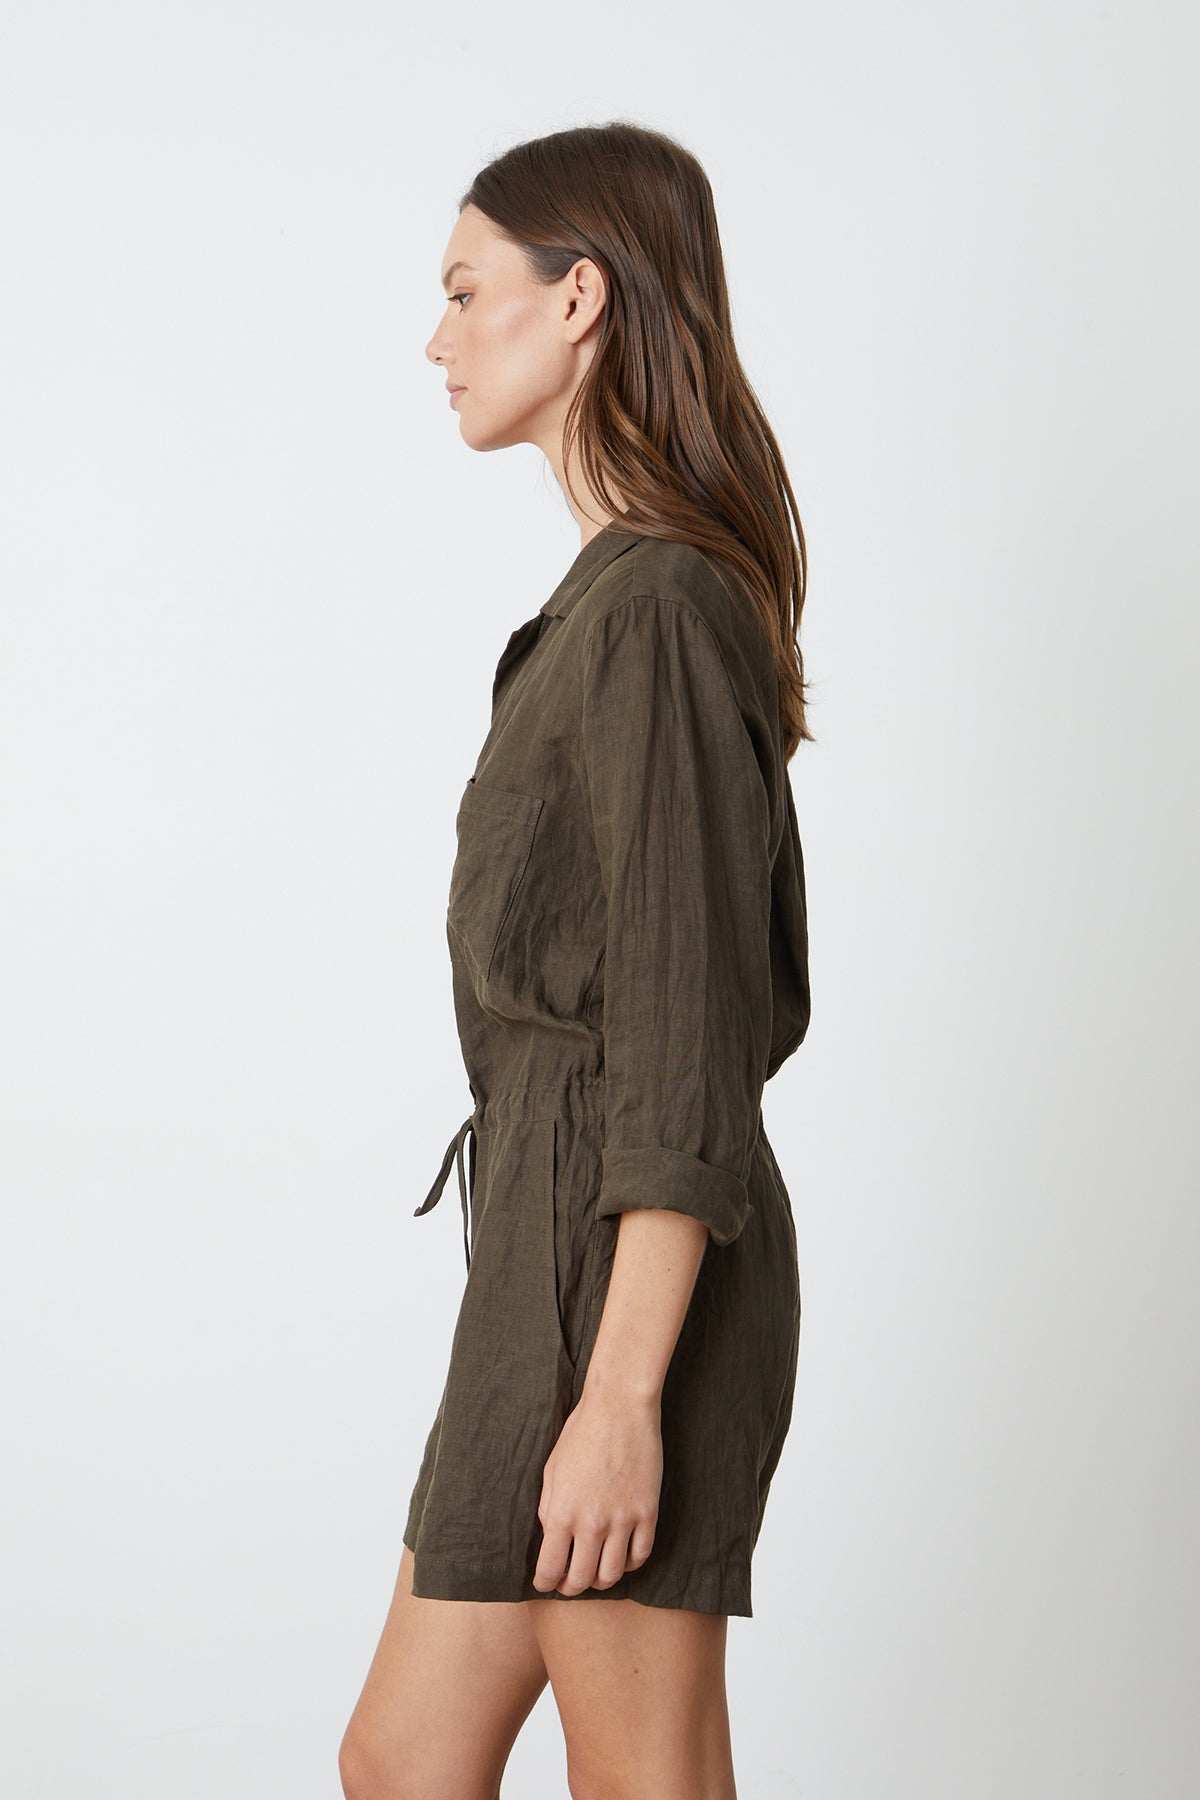   The sentence: the back view of a woman wearing an olive romper.
Revised sentence: the back view of a woman wearing the RUTH LINEN ROMPER by Velvet by Graham & Spencer. 